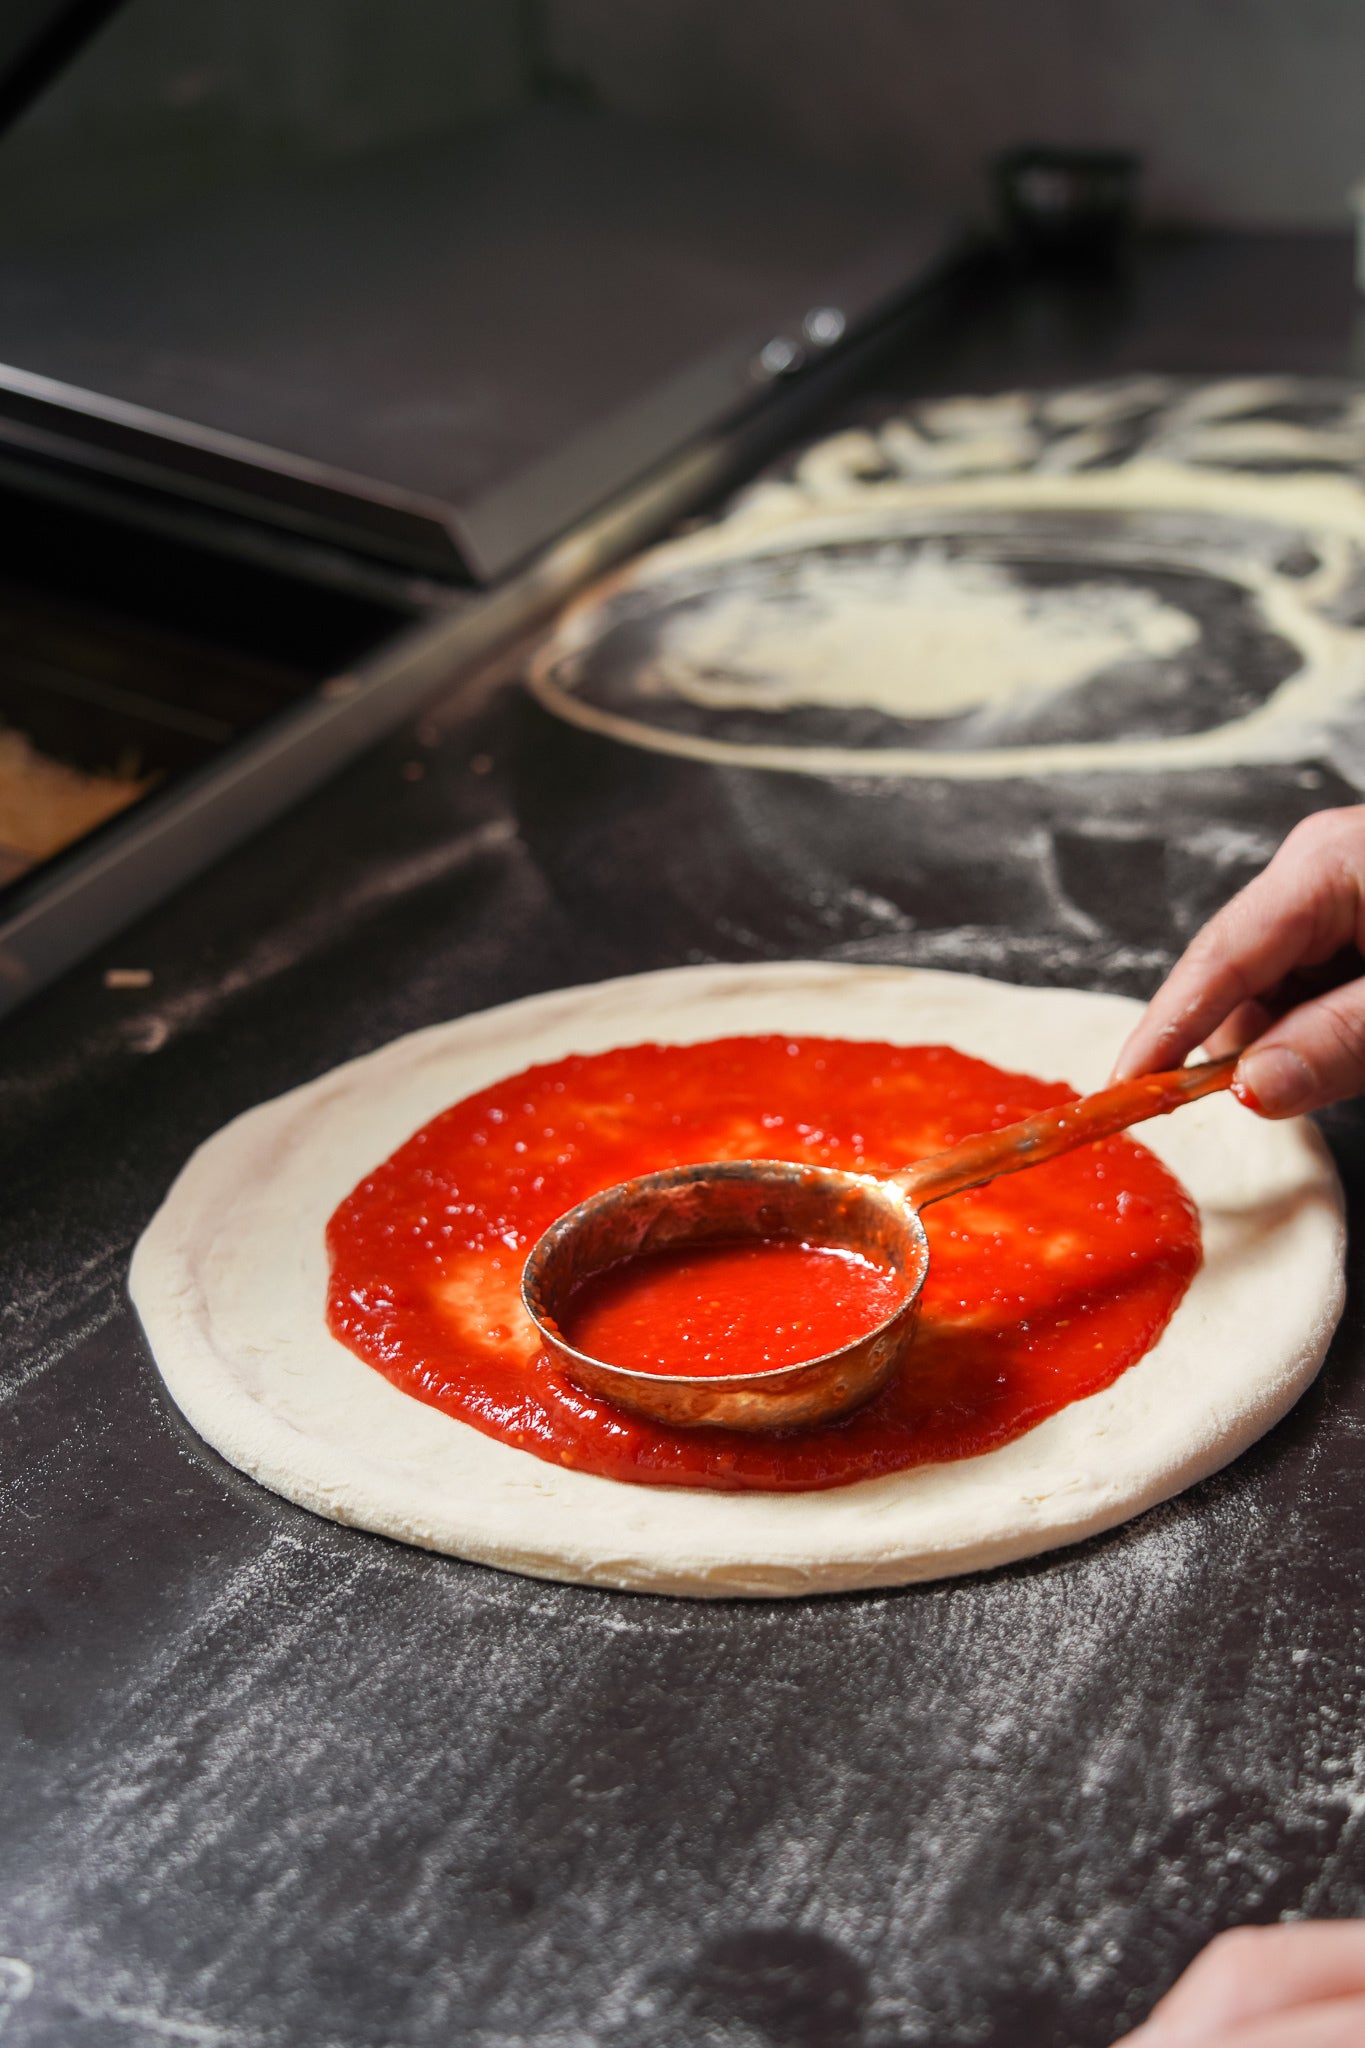 Build your own Custom Pizza